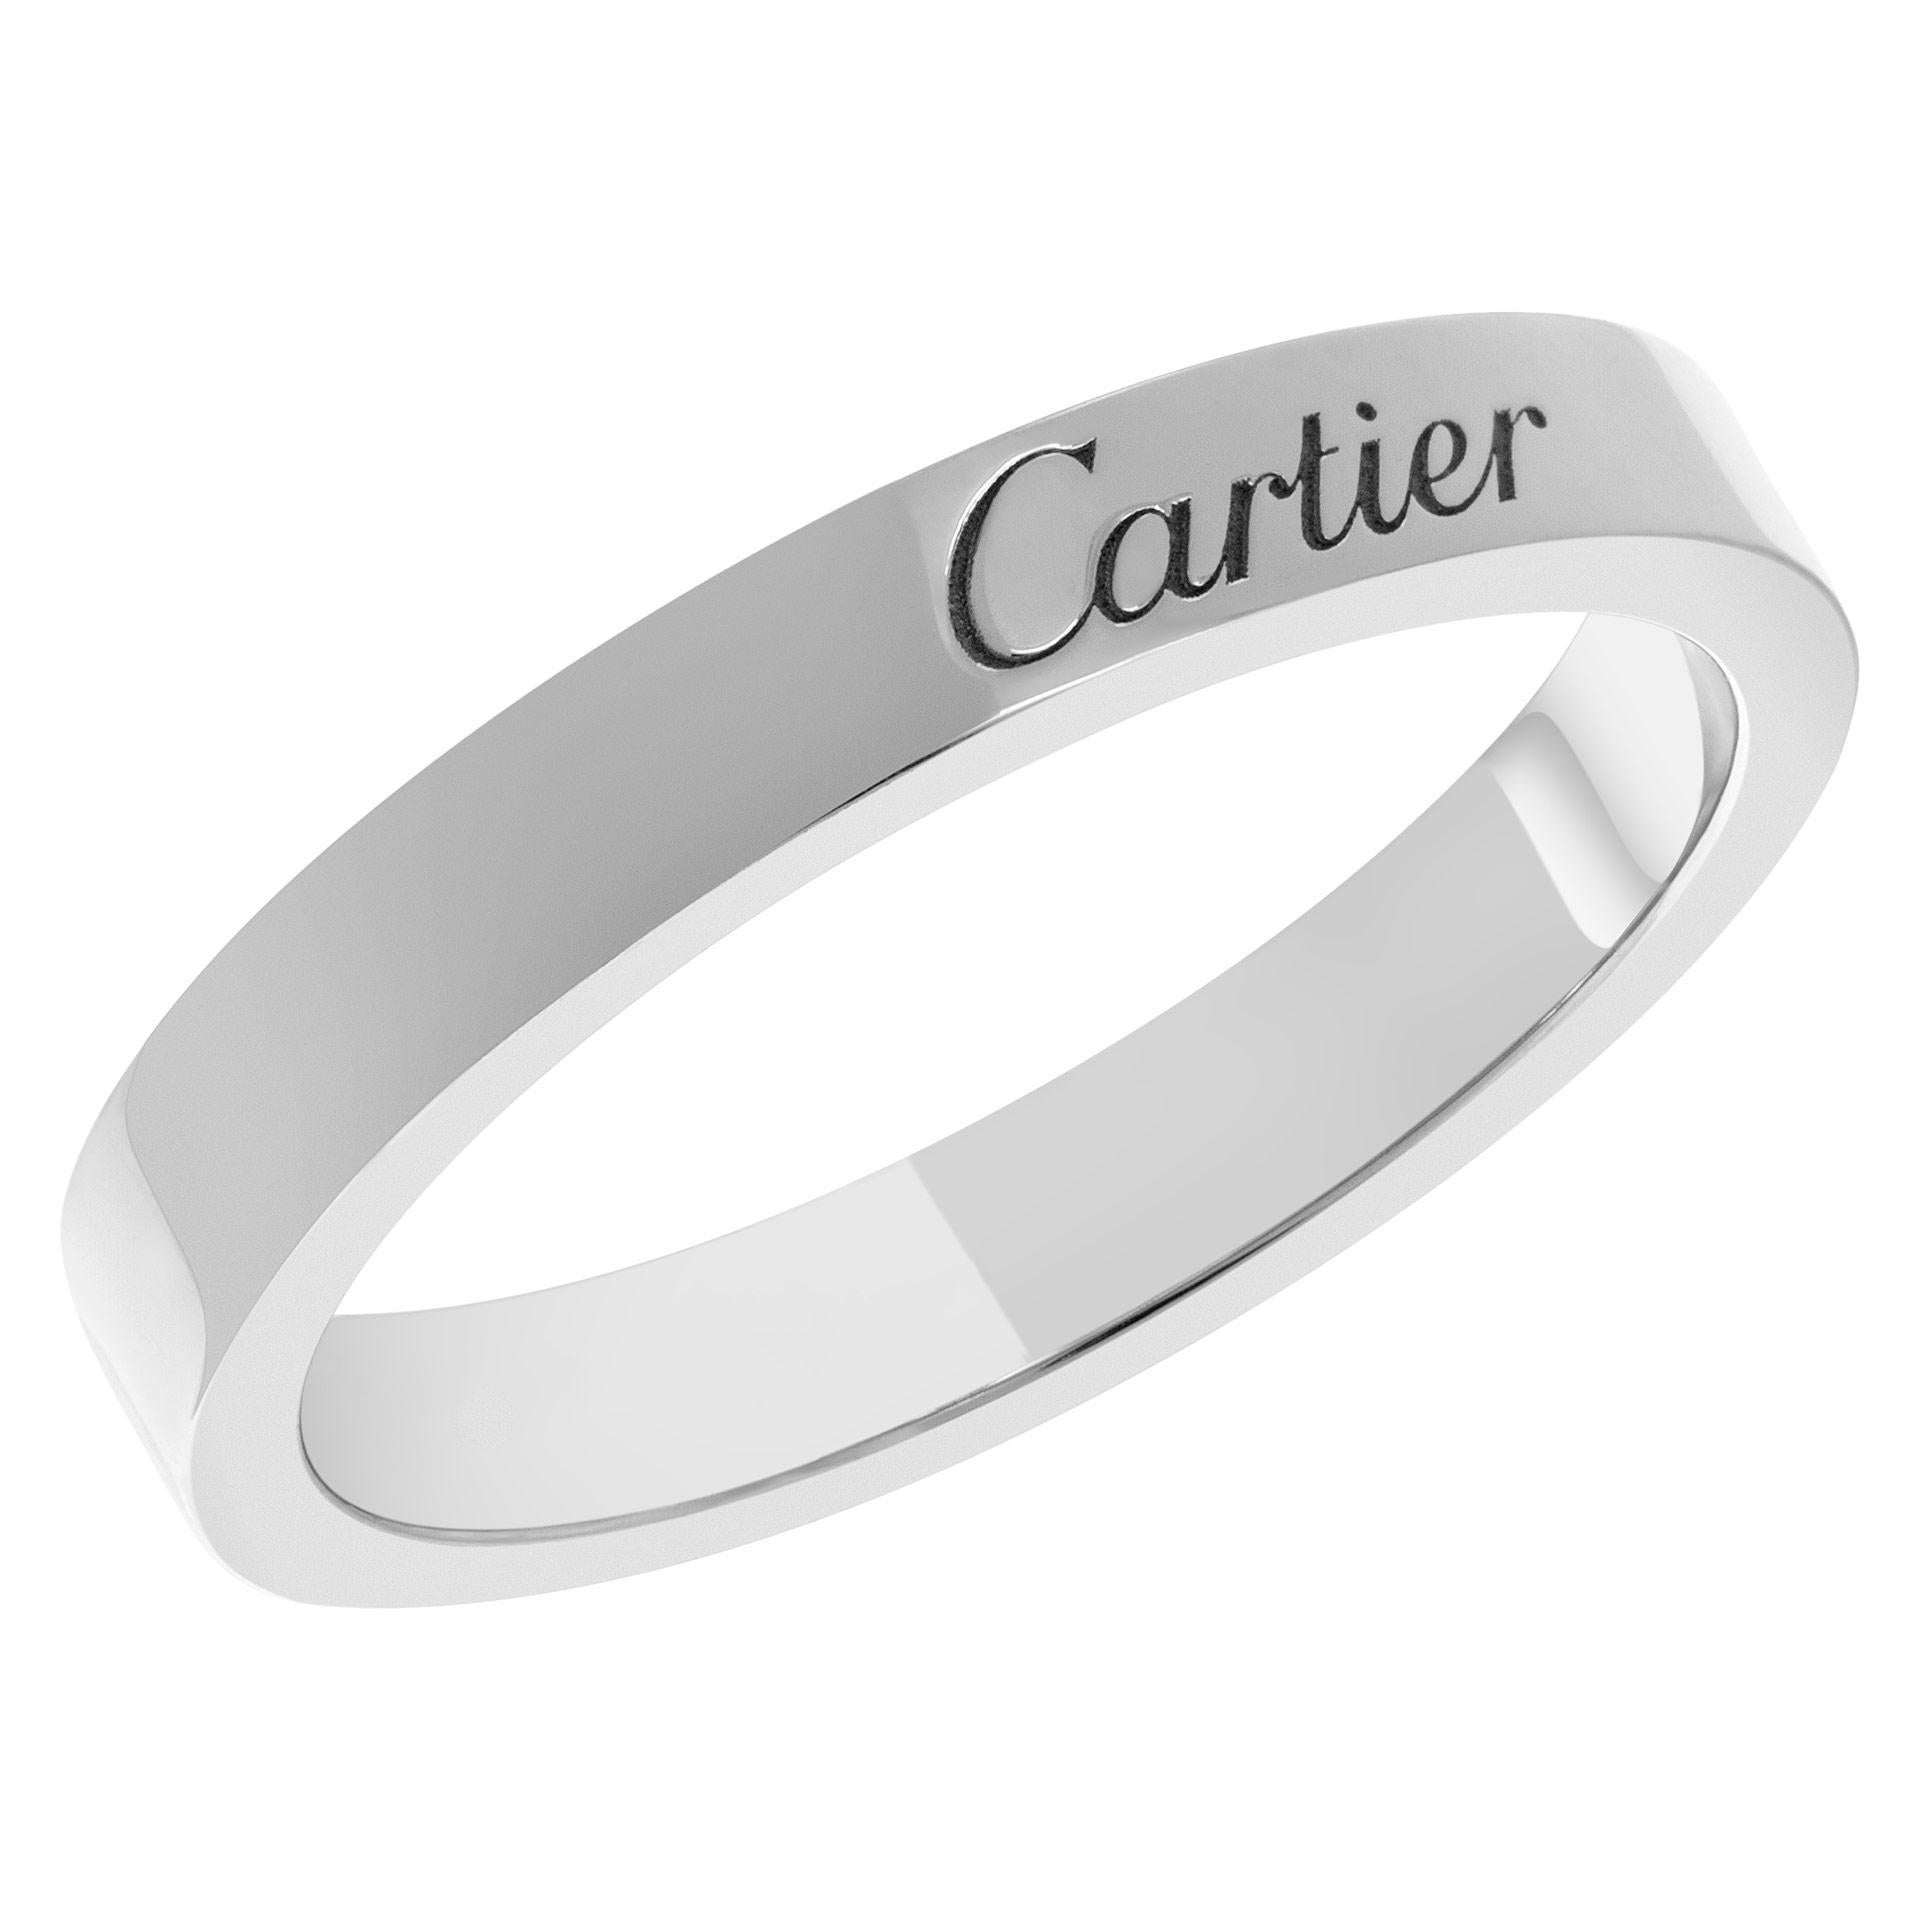 C De Cartier Wedding band in platinum. Width: 3mm. With Box. REF: B4054000. Size 53

This Cartier ring is currently size 6.25 and some items can be sized up or down, please ask! It weighs 3.3 pennyweights and is Platinum.